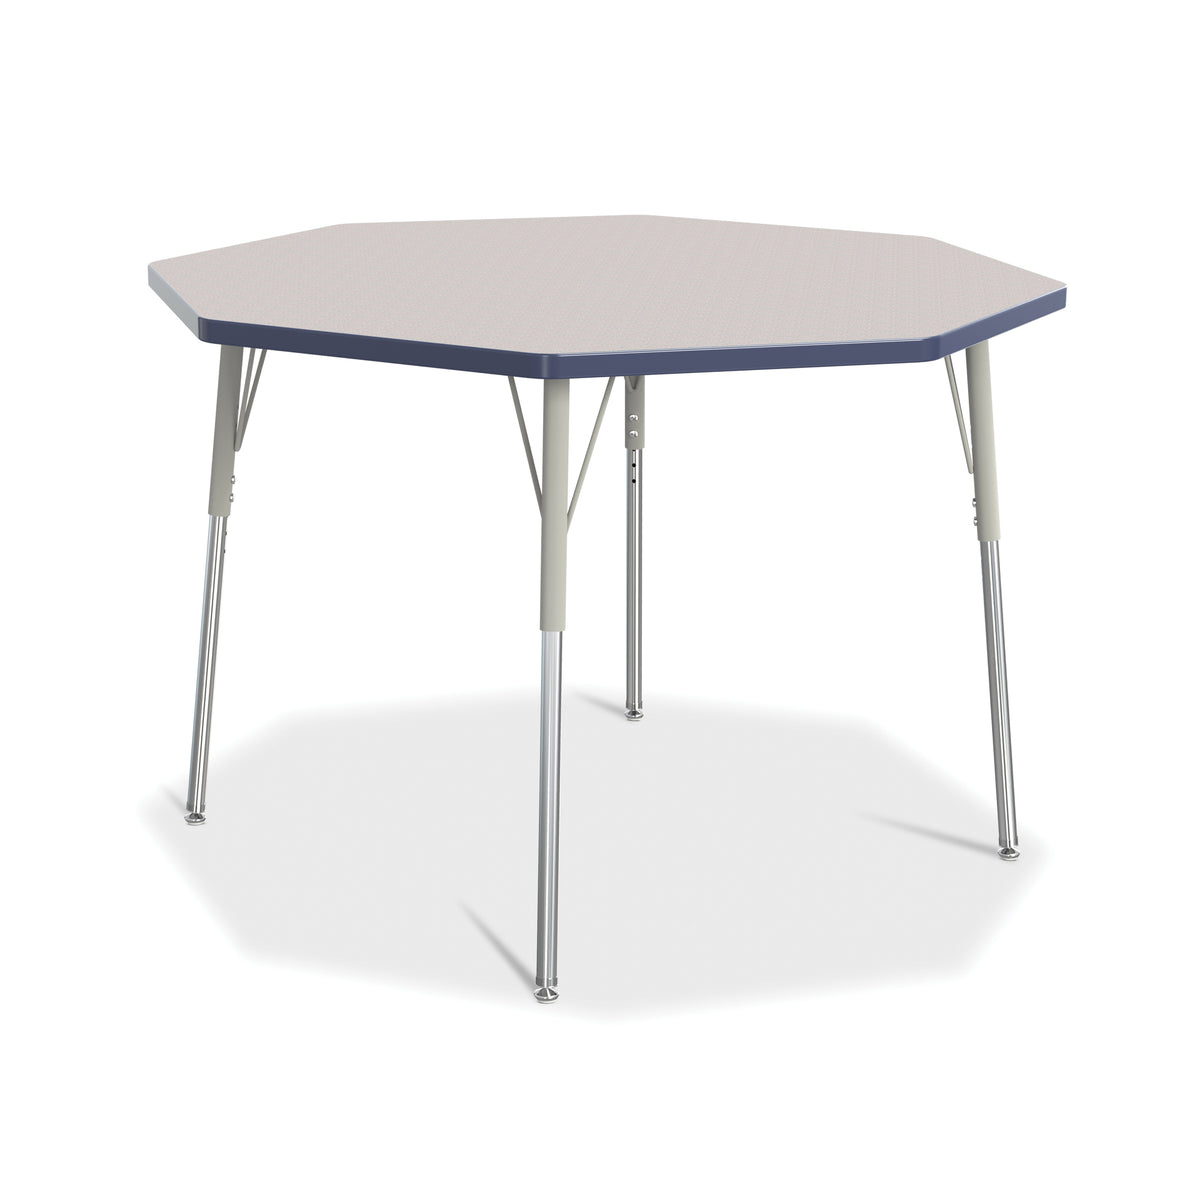 6428JCA112, Berries Octagon Activity Table - 48" X 48", A-height - Freckled Gray/Navy/Gray